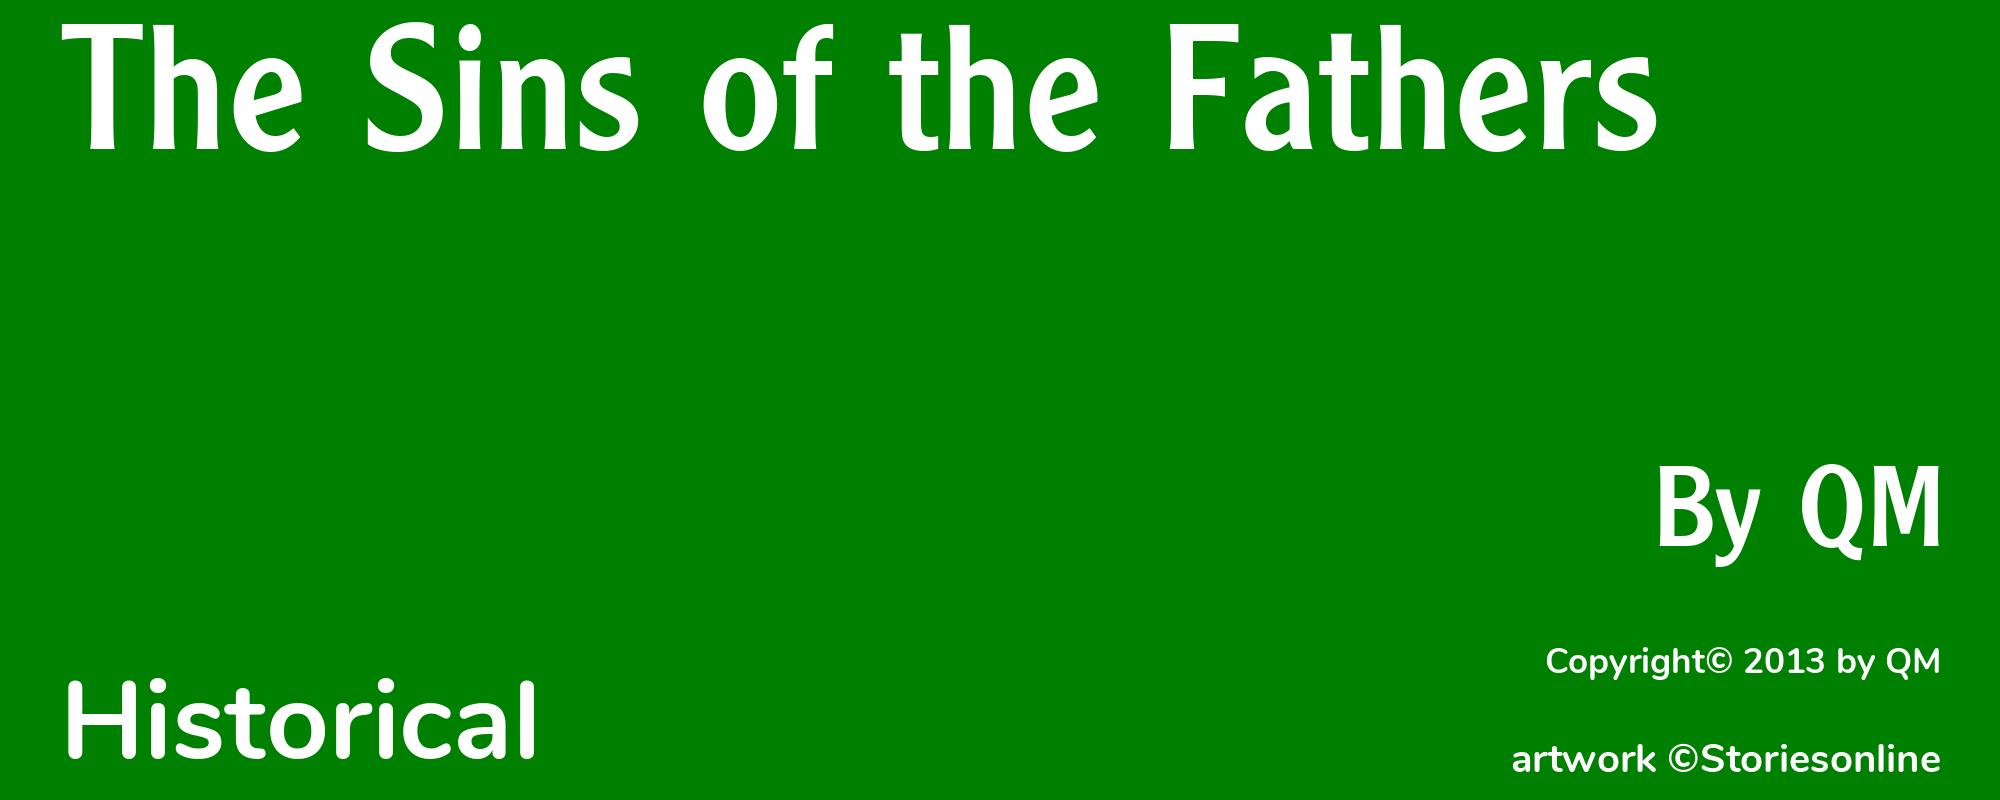 The Sins of the Fathers - Cover